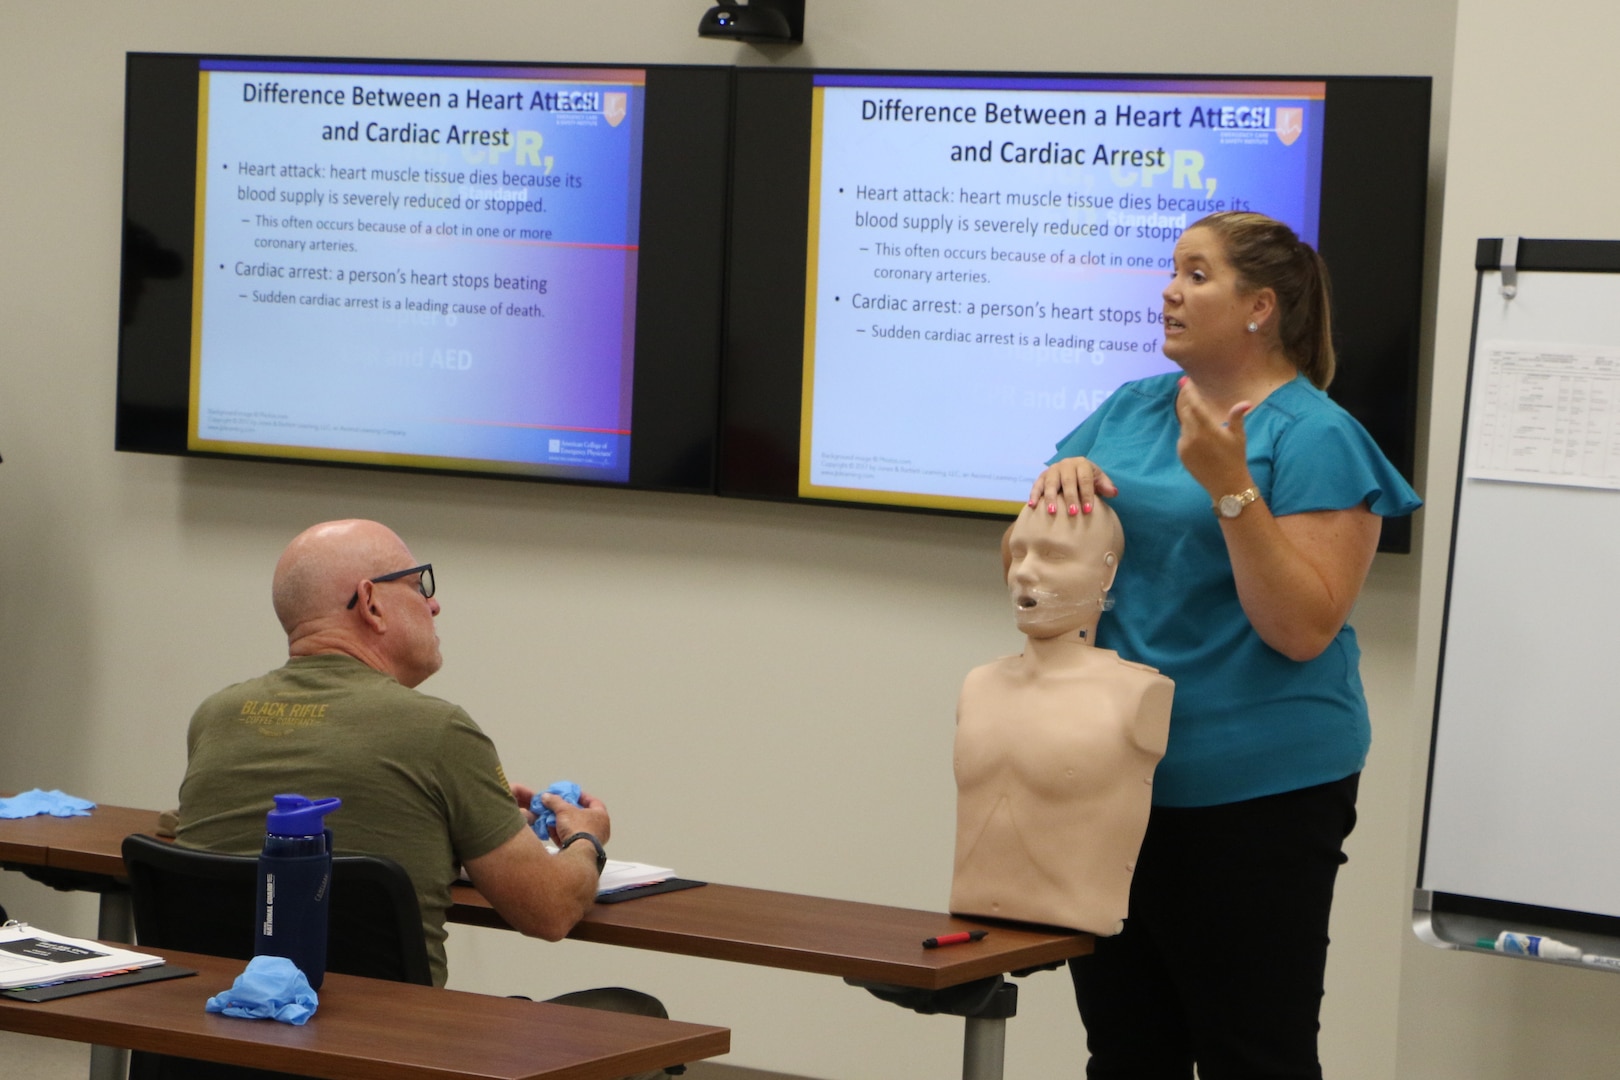 DMA trade technicians complete annual safety training